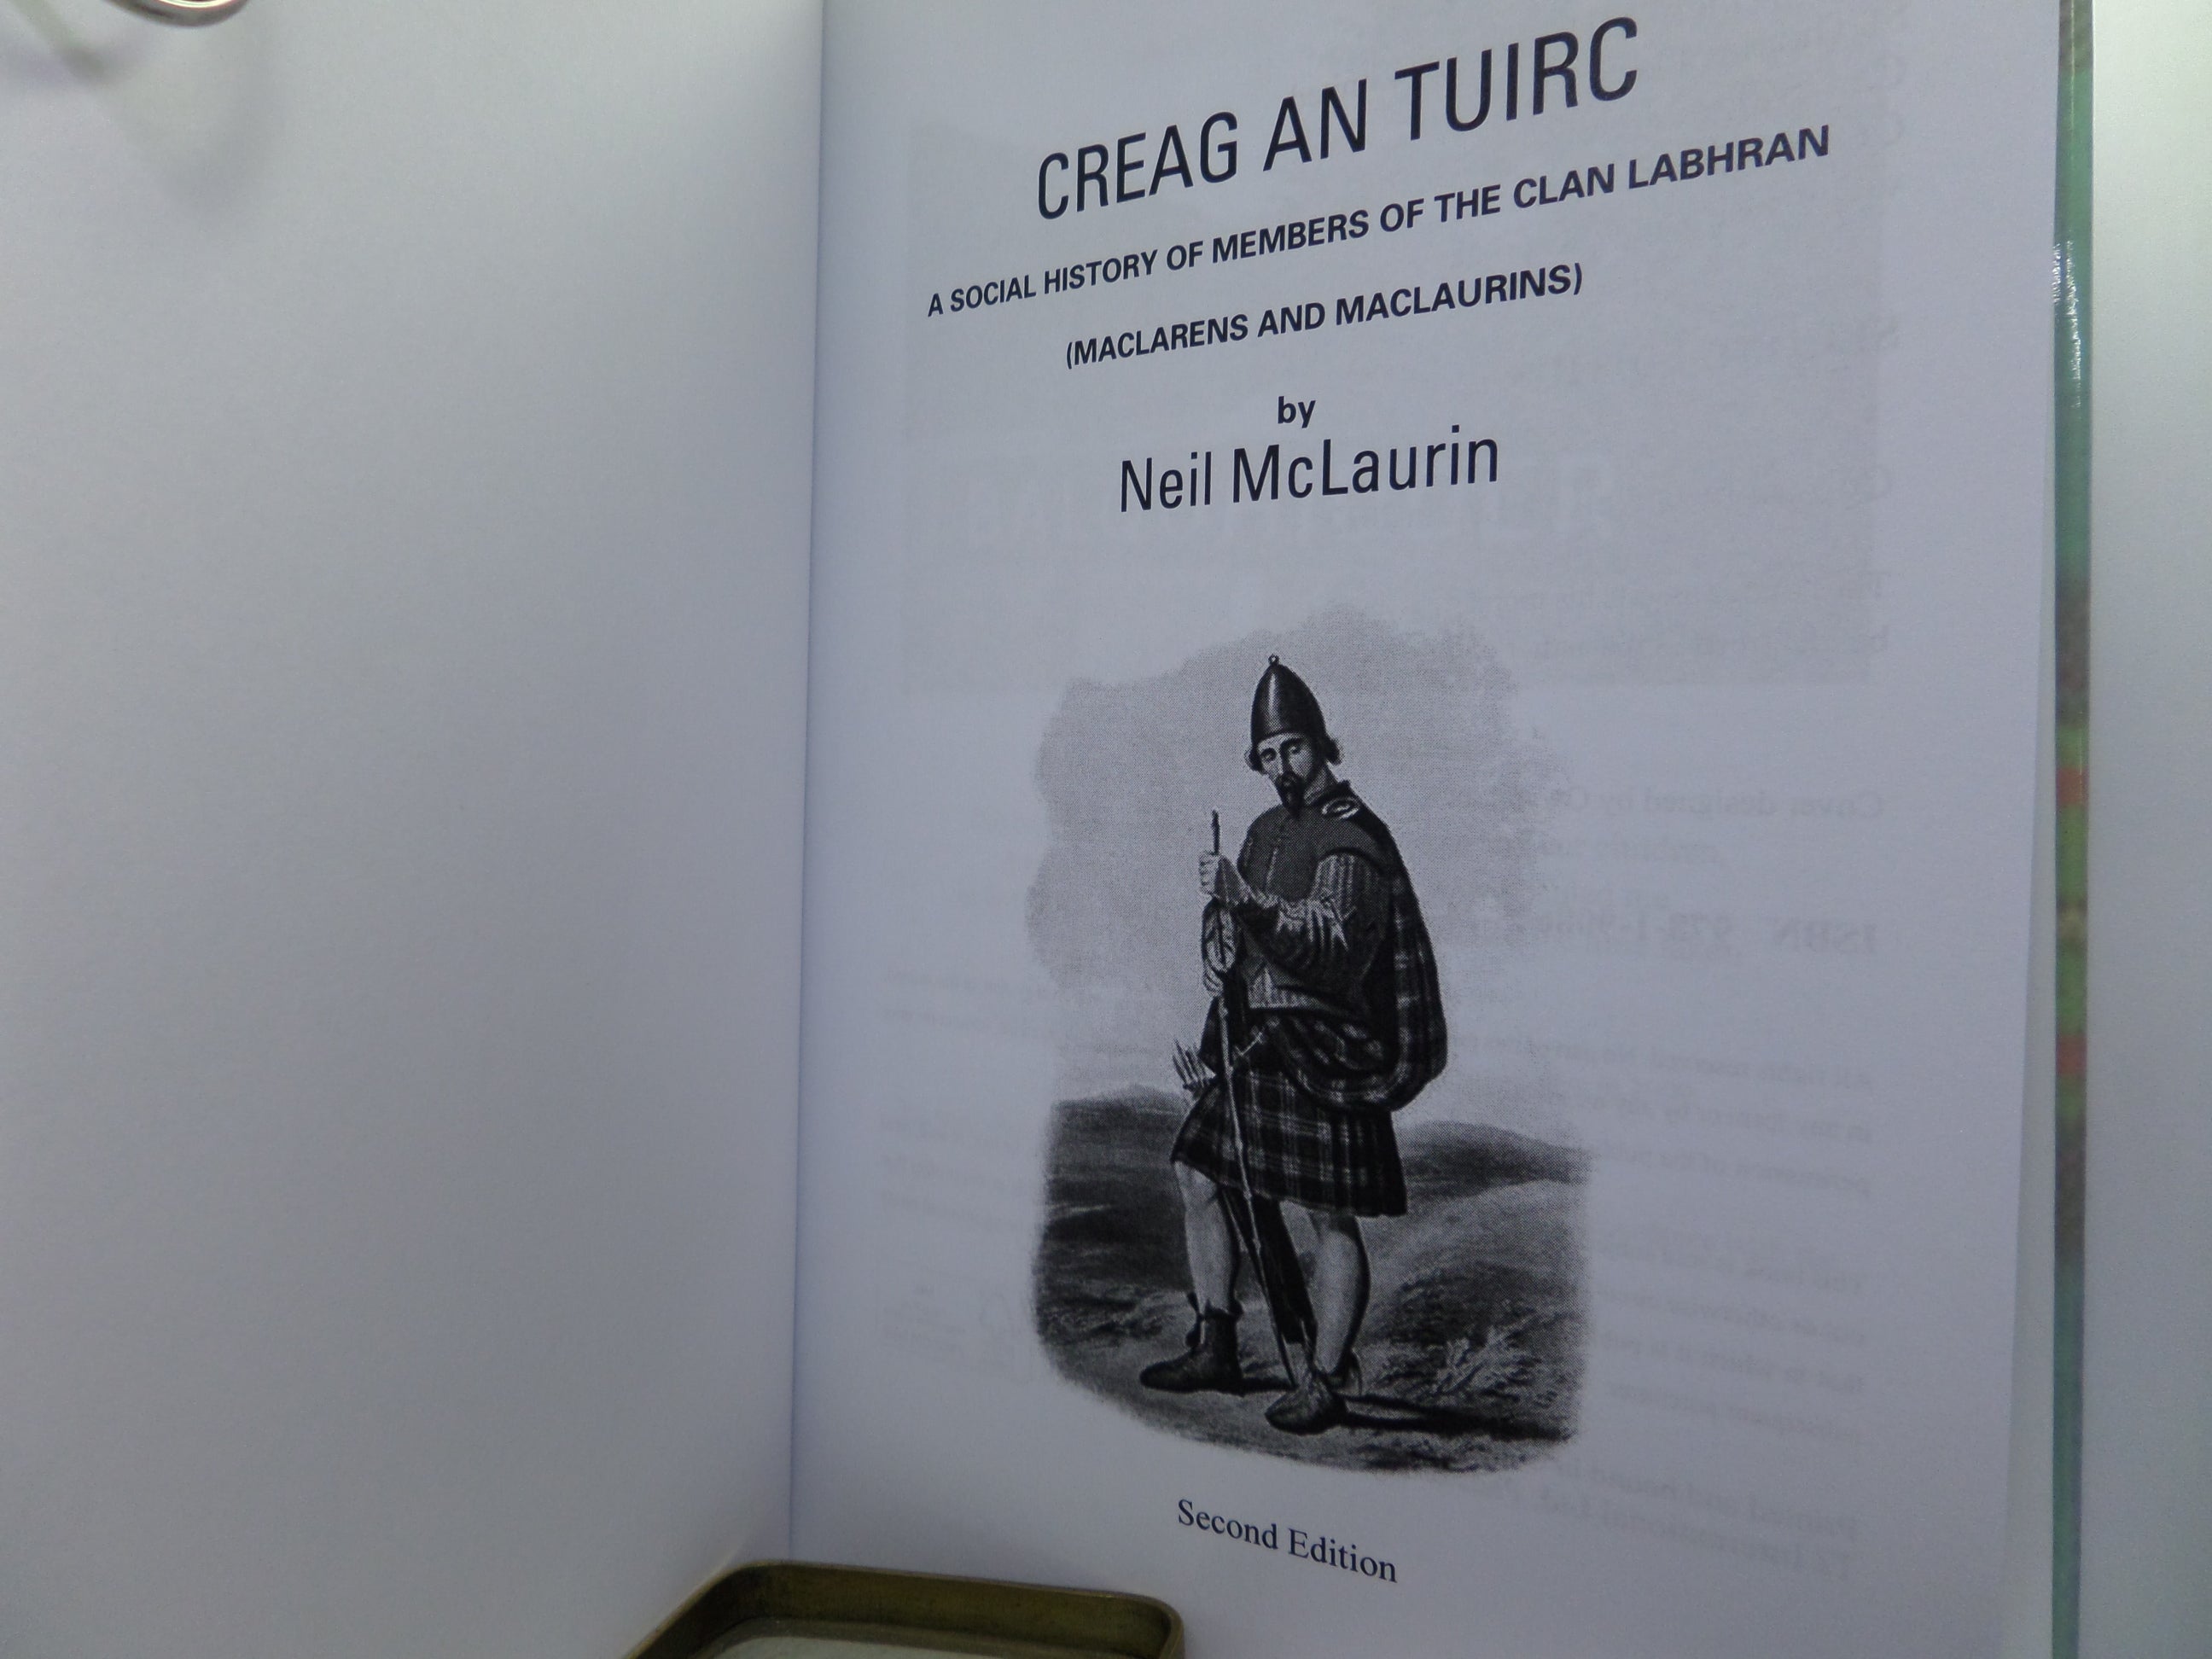 CREAG AN TUIRC: A SOCIAL HISTORY OF MEMBERS OF THE CLAN LABHRAN BY NEIL MCLAURIN